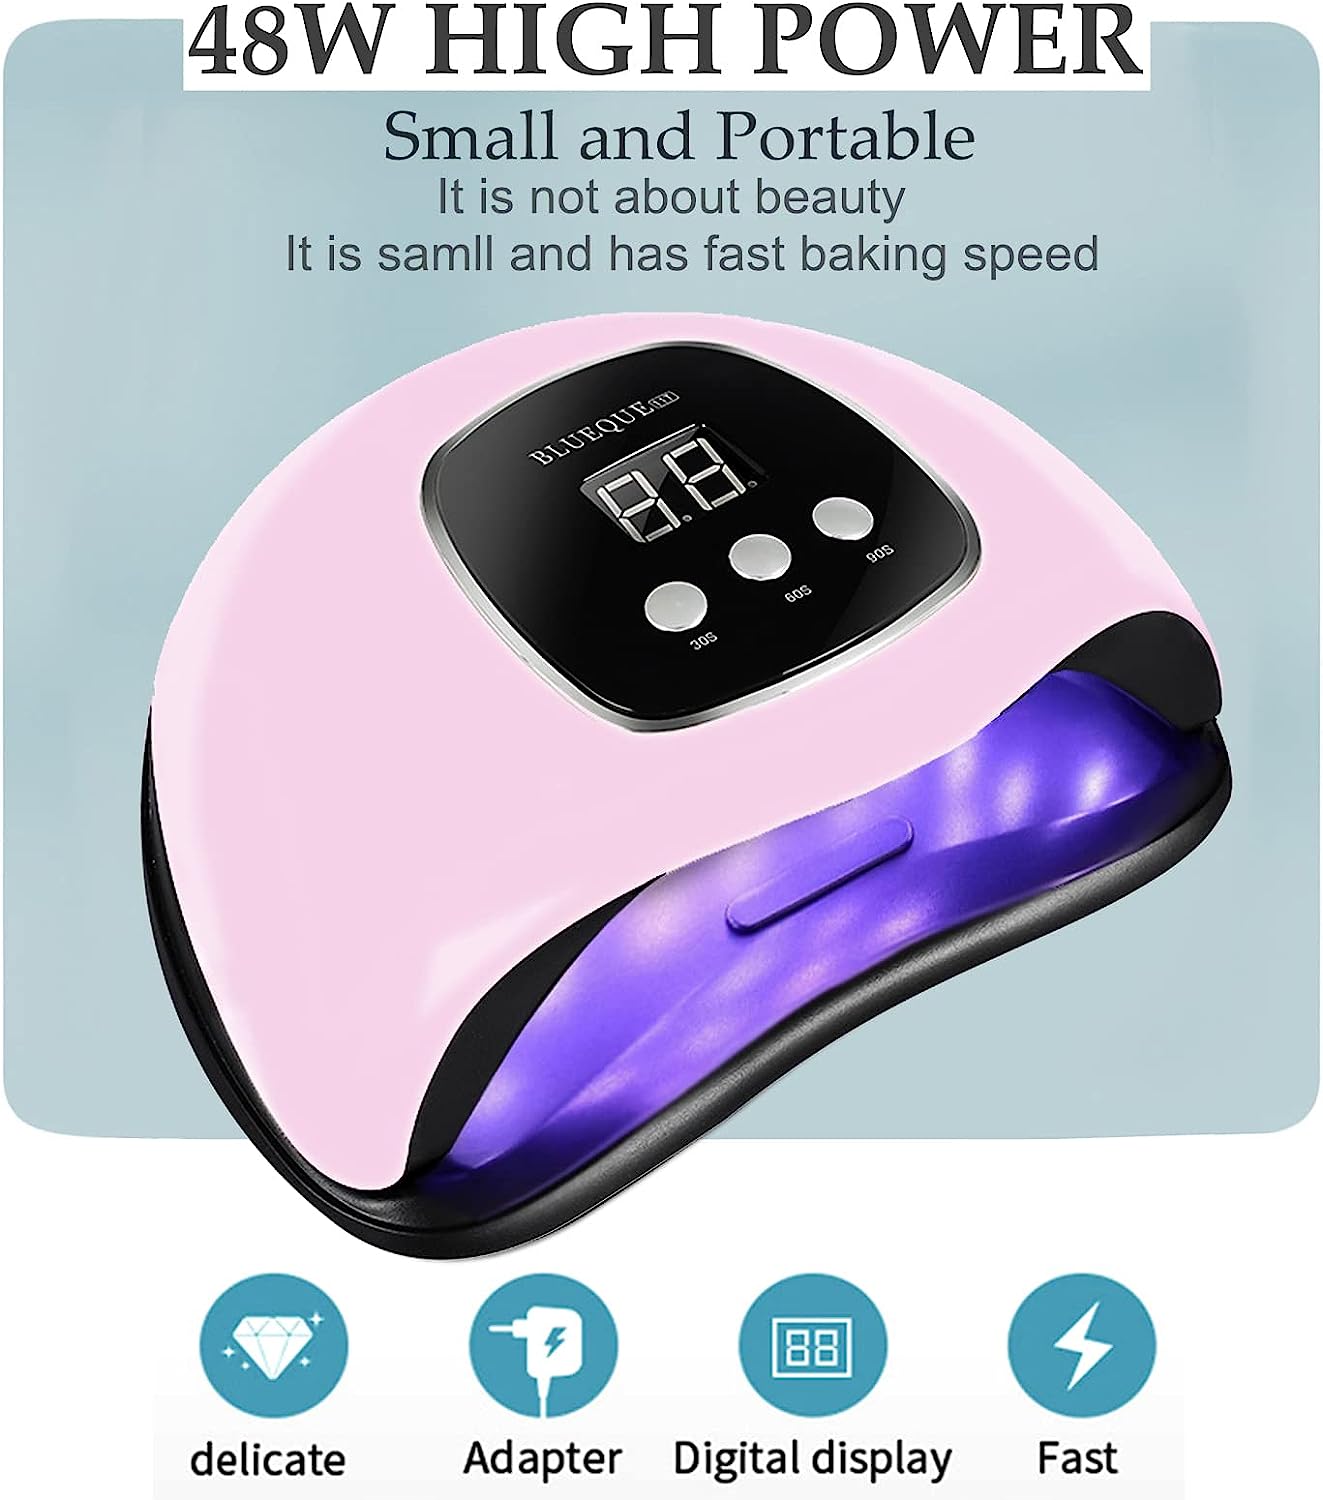 48W UV LED Nail Lamp UV Light for Gel Polish, Fast Nail Dryer with Automatic Sensor, 3 Timer Setting, Small and Portable